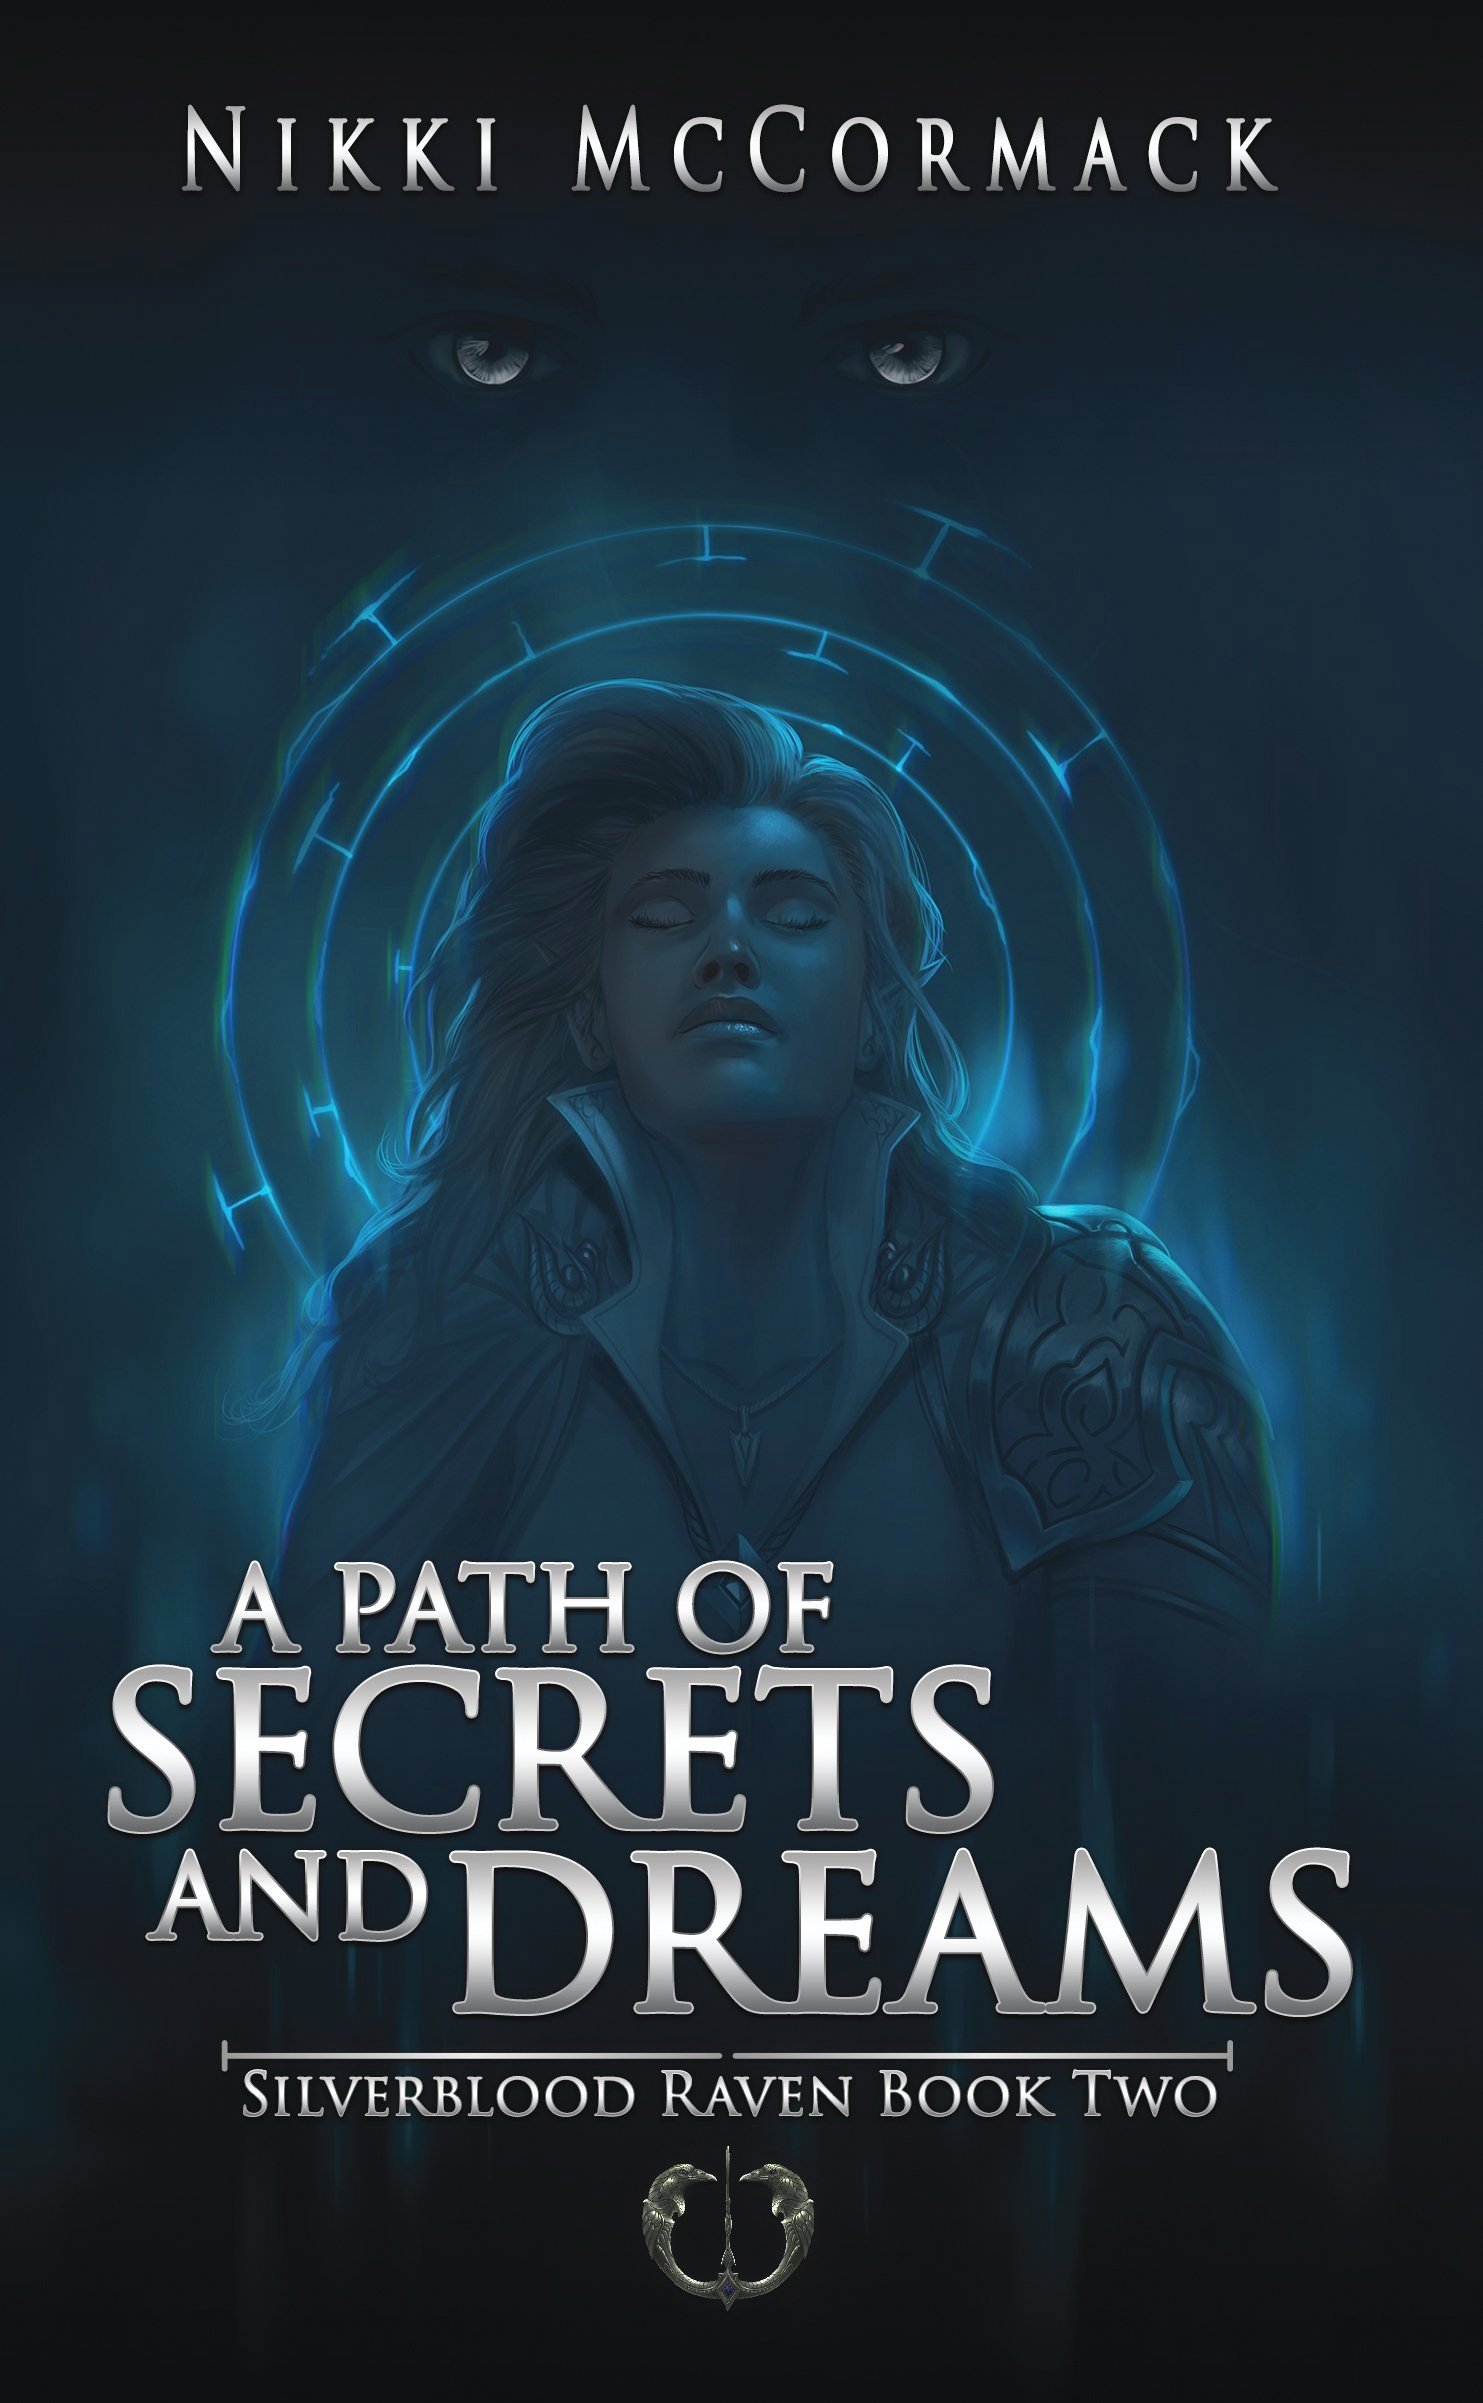 A+Path+of+Secrets+and+Dreams+Series+Front.jpg